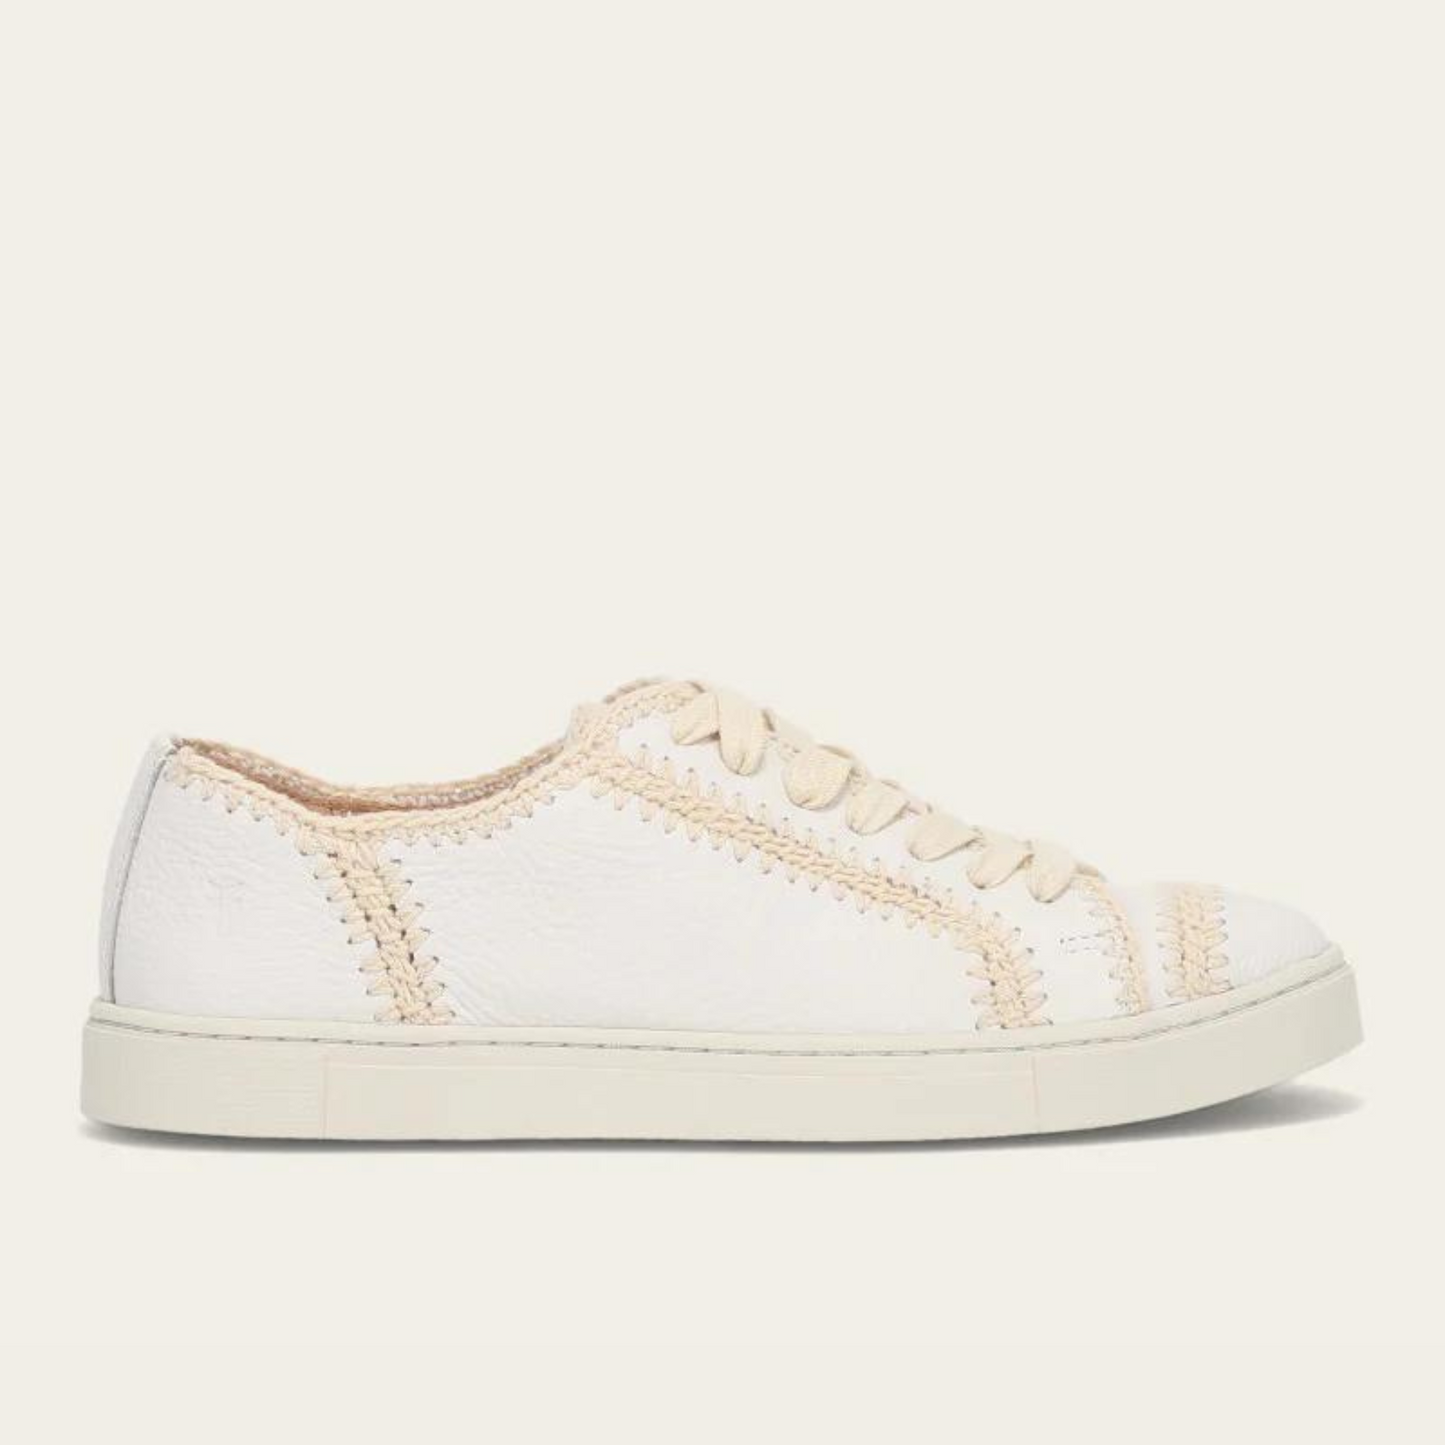 Side view of Women's white crochet stitched low top lace up sneaker by FRYE